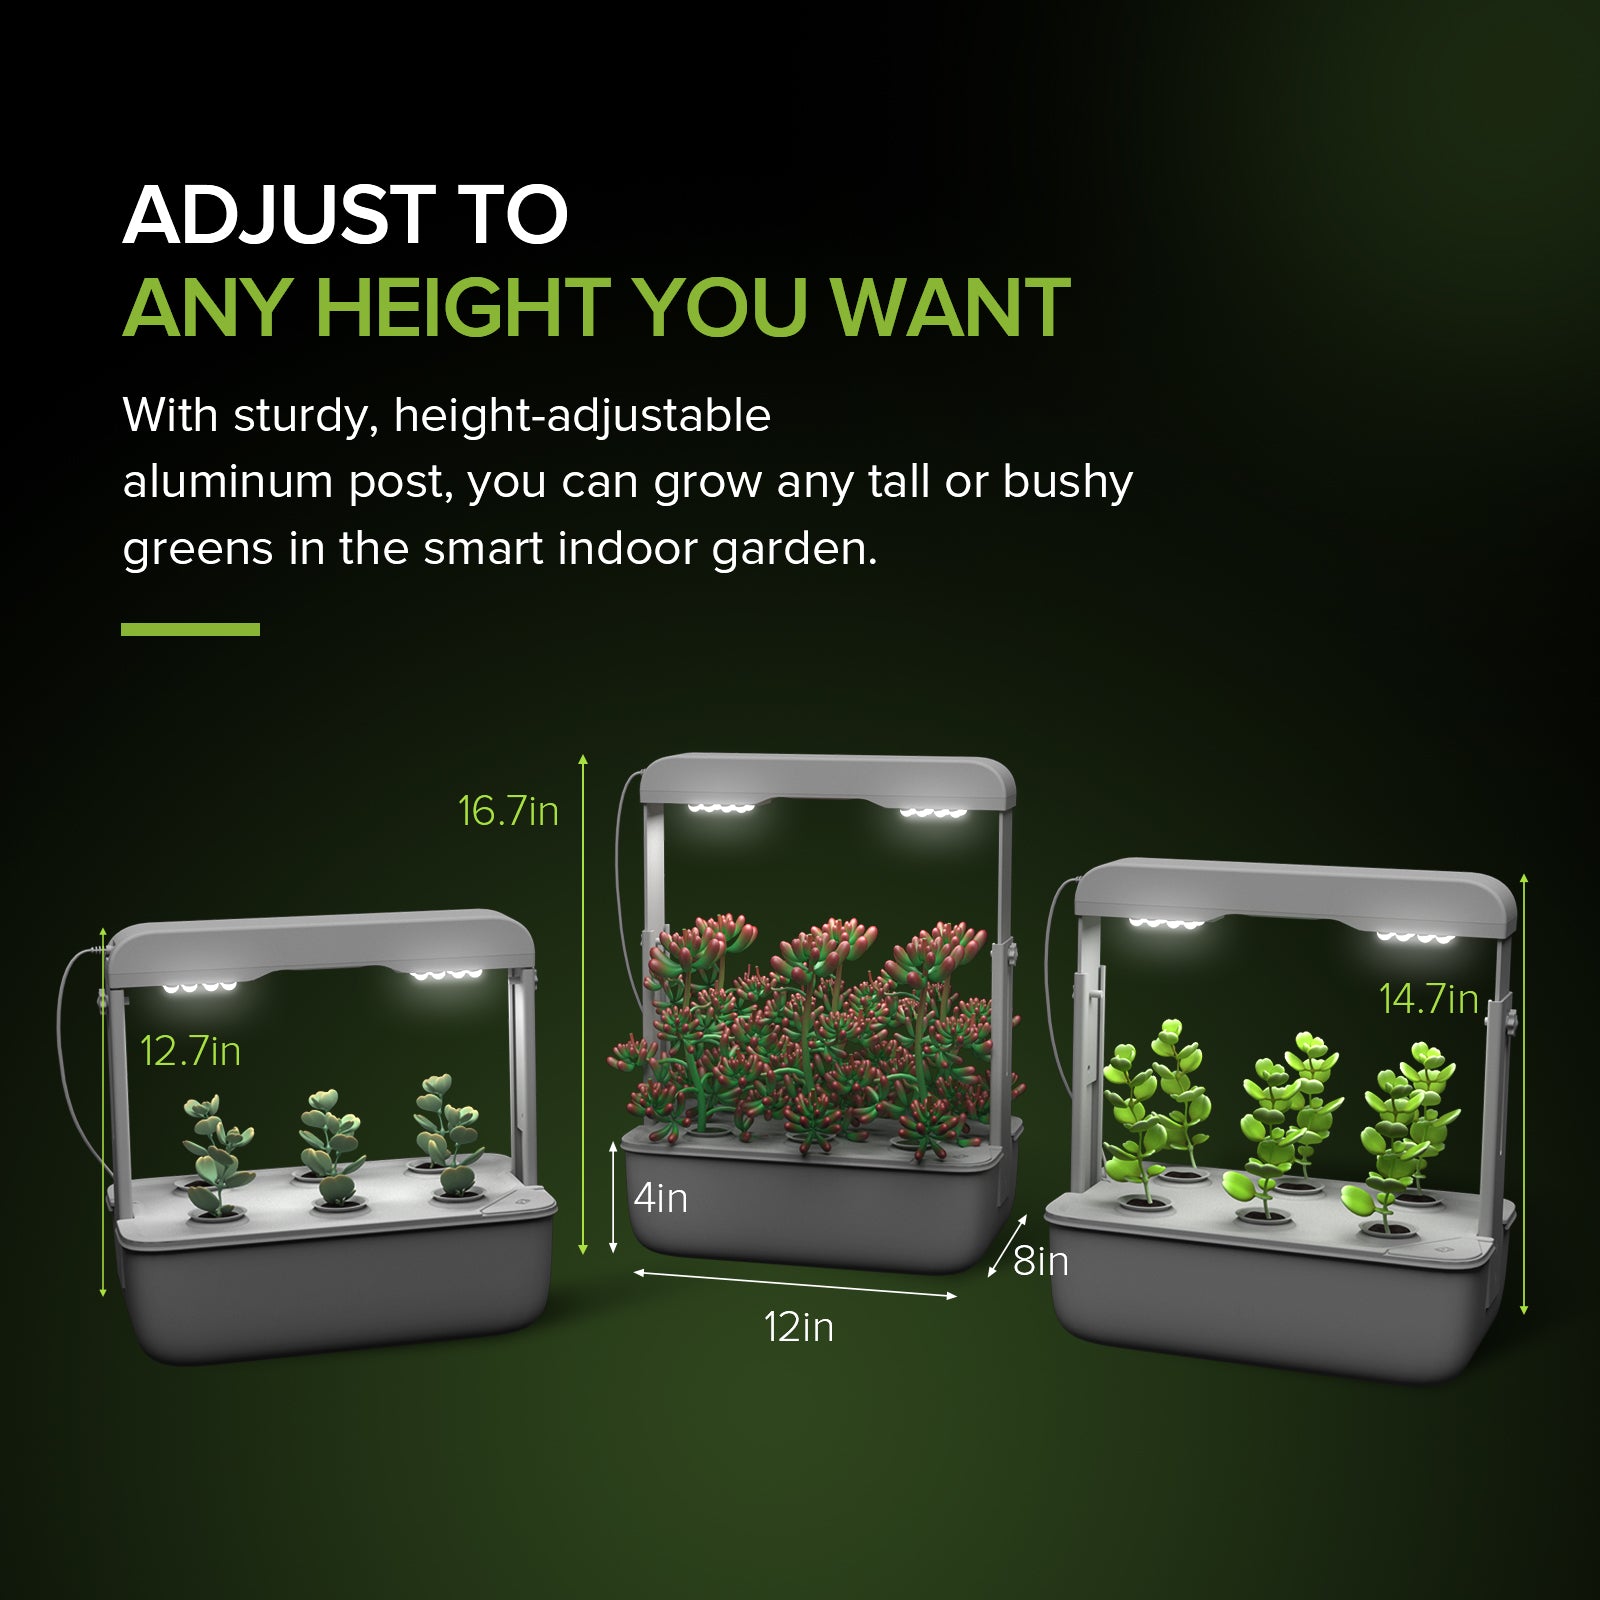 Hydroponics Growing System(US ONLY) can be adjusted to any height you want,With sturdy, height-adjustablealuminum post, you can grow any tall or bushygreens in the smart indoor garden.